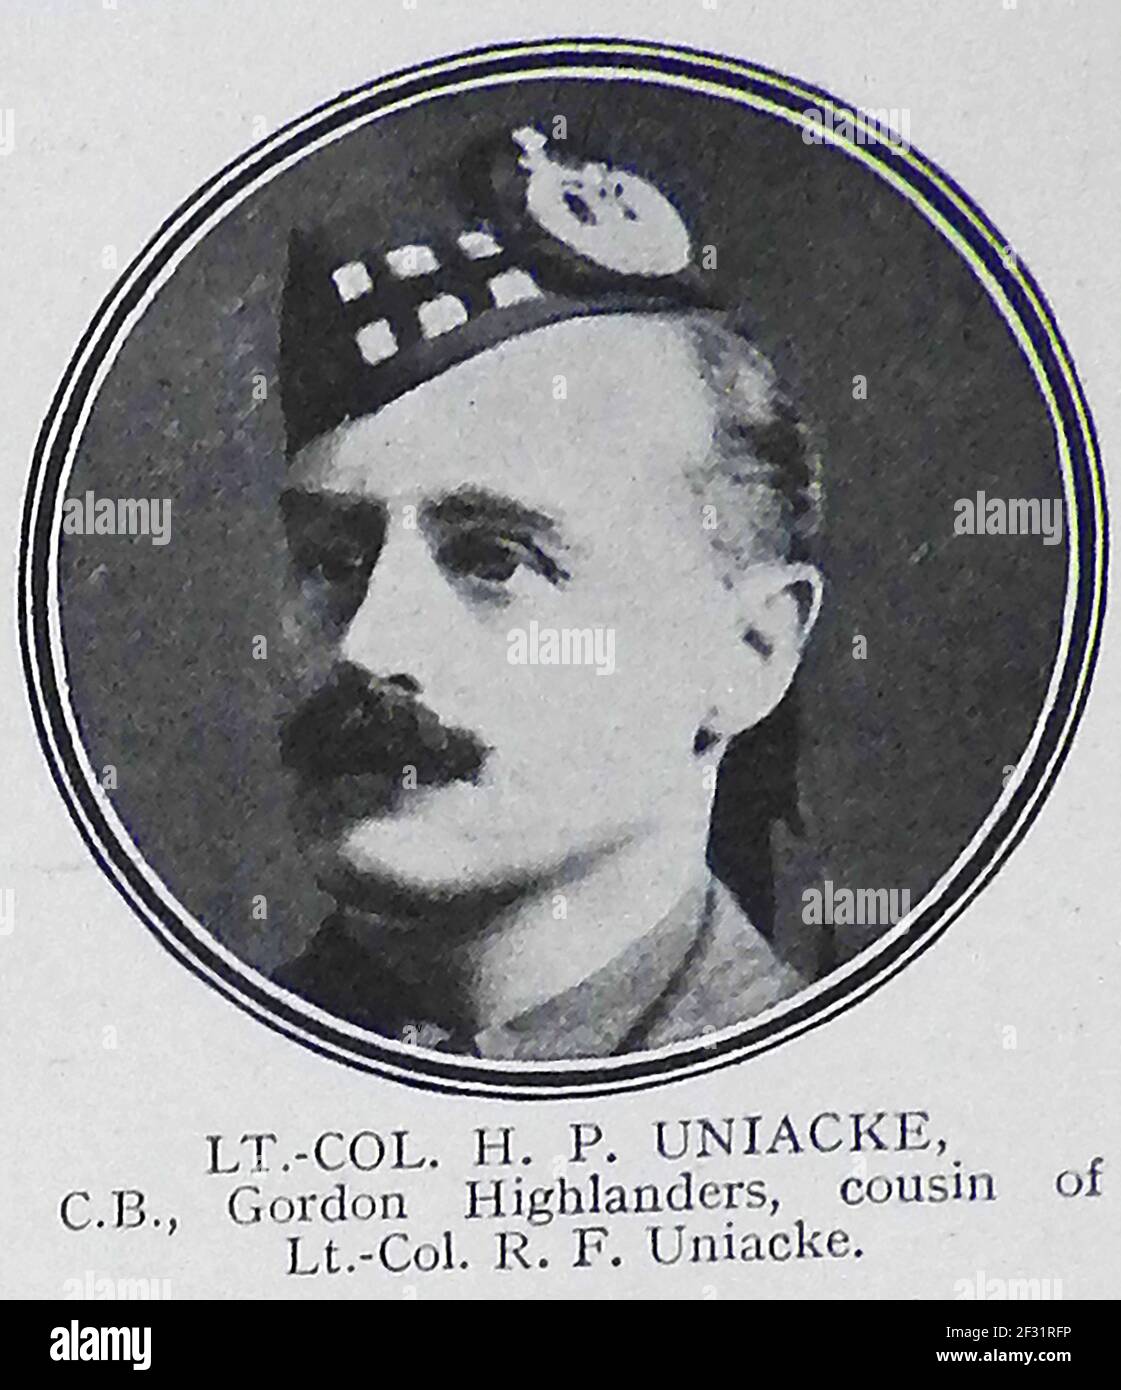 LIEUTENANT H P UNIACKE C.B. of the Gordon Highlanders. (Cousin of Colonel R F Uniacke.) -   A printed portrait from a 1914-1915 role of honour page of those killed in action in World War One. Stock Photo